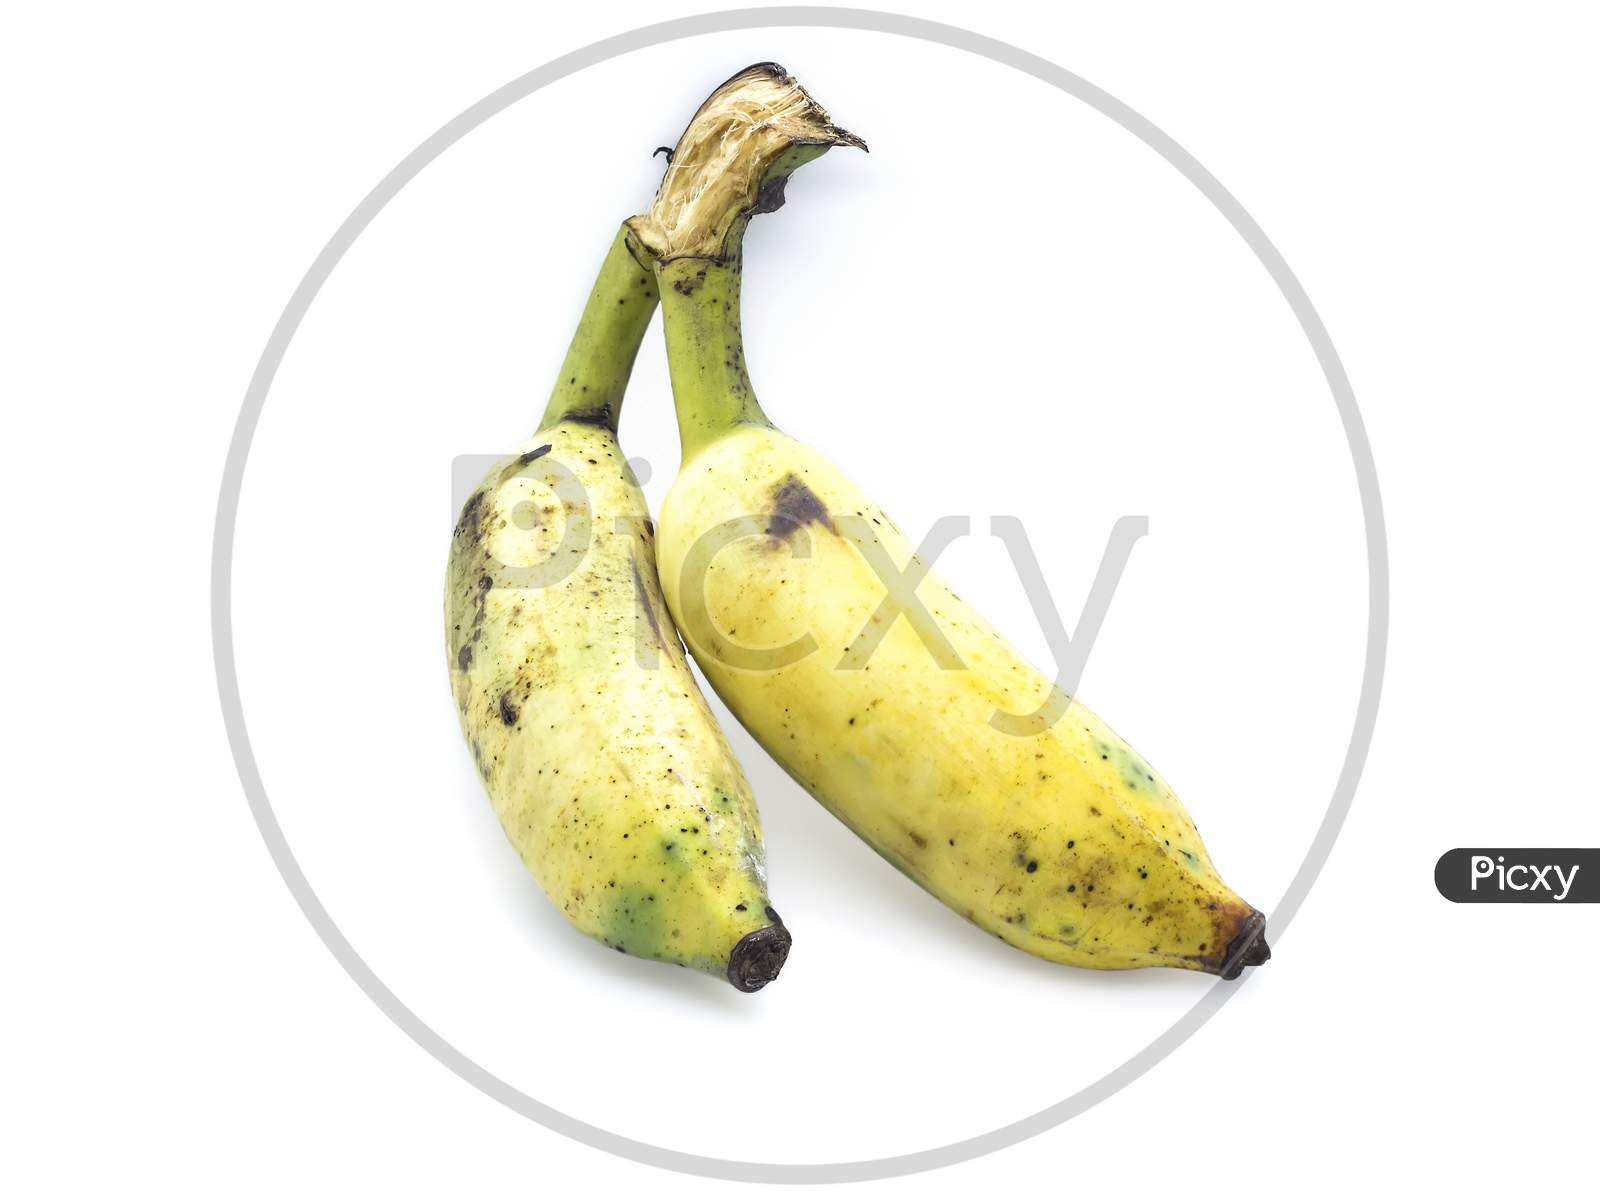 Bananas Isolated On White Background. Top View